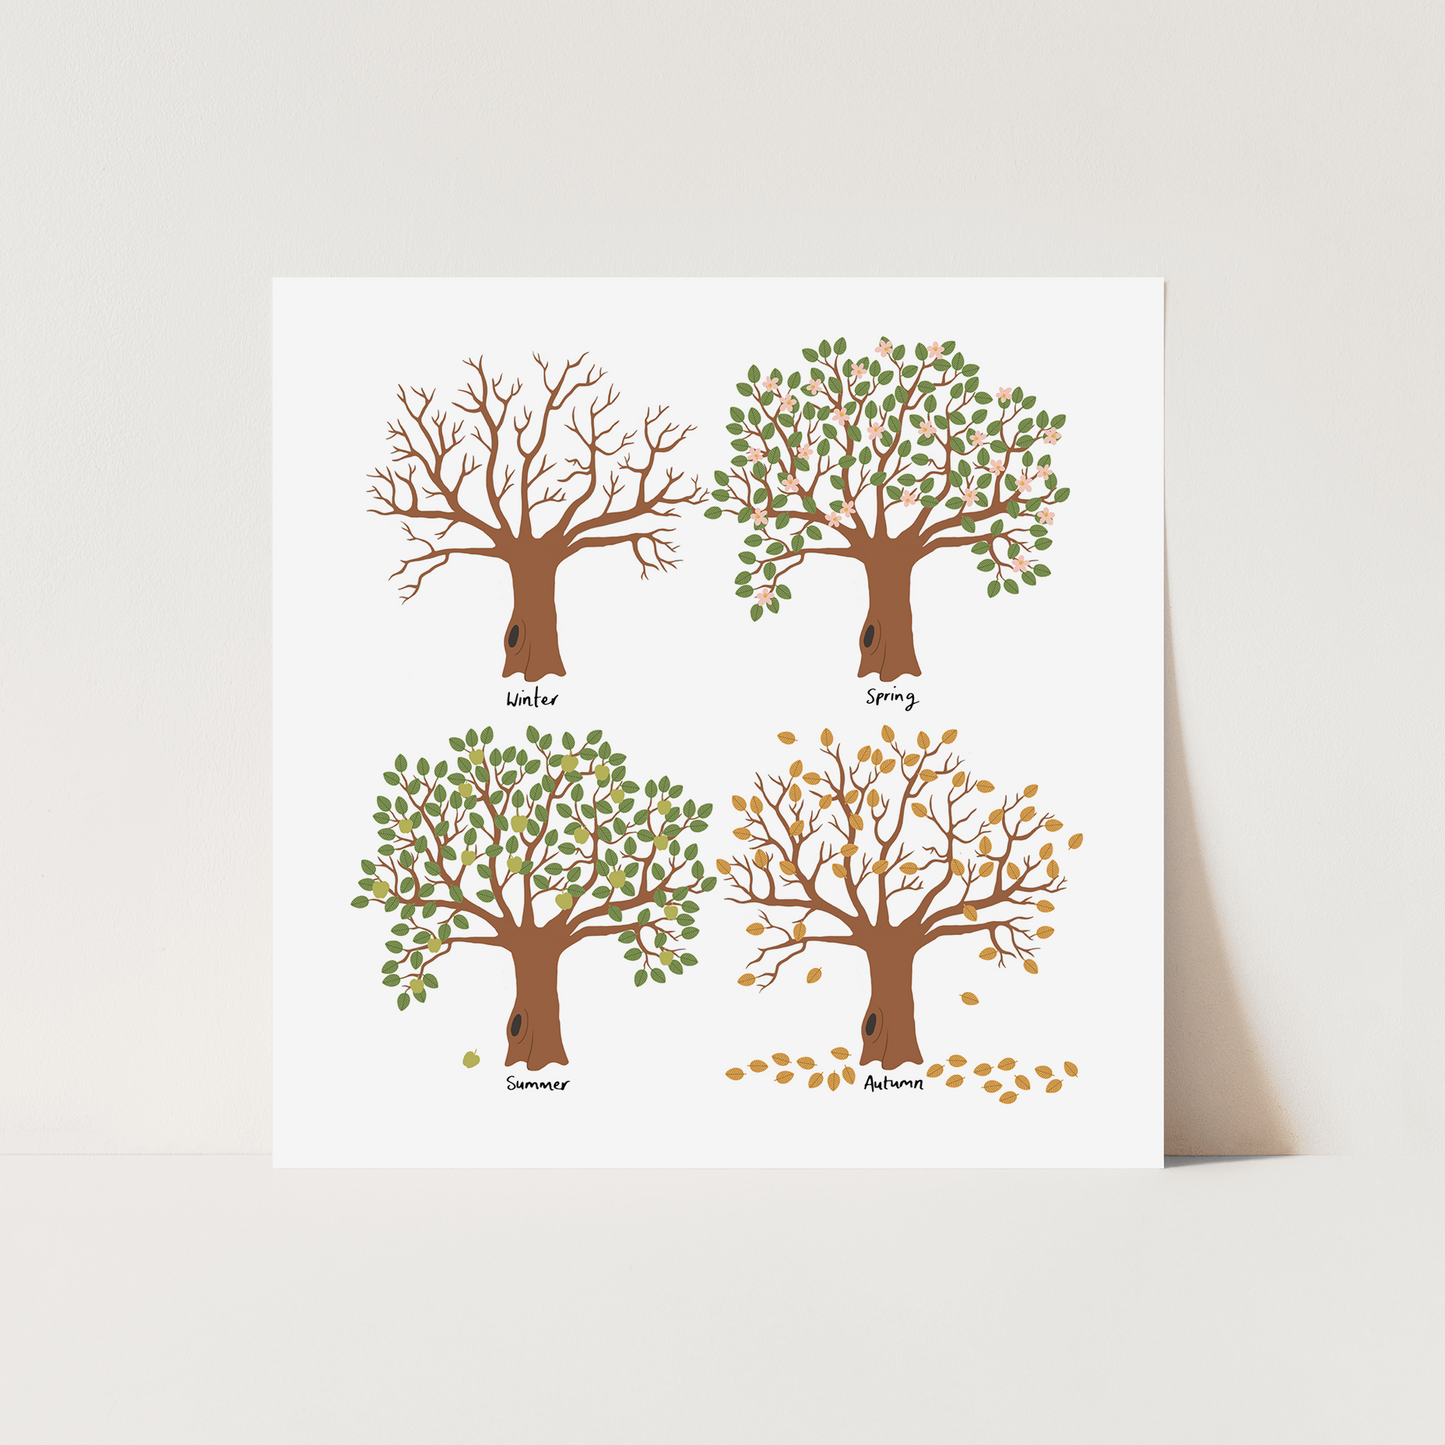 Seasons Art Print by Kid of the Village (2 Sizes Available)